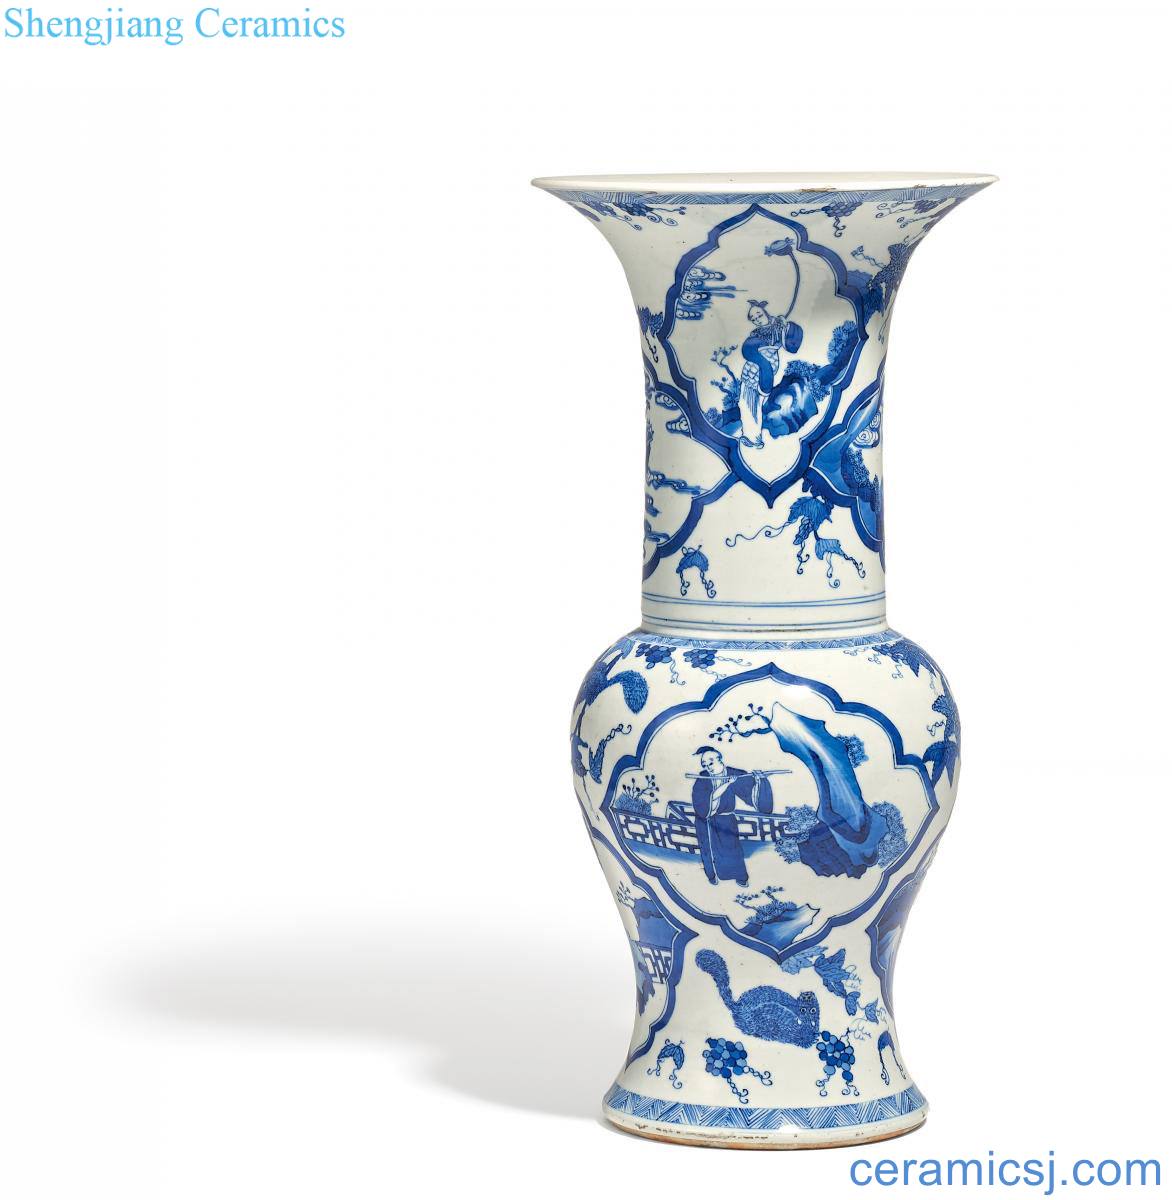 The imitation of kangxi reign of qing emperor guangxu 19 to 20 century Blue and white squirrel grape grain PND tail-on statue of the eight immortals characters